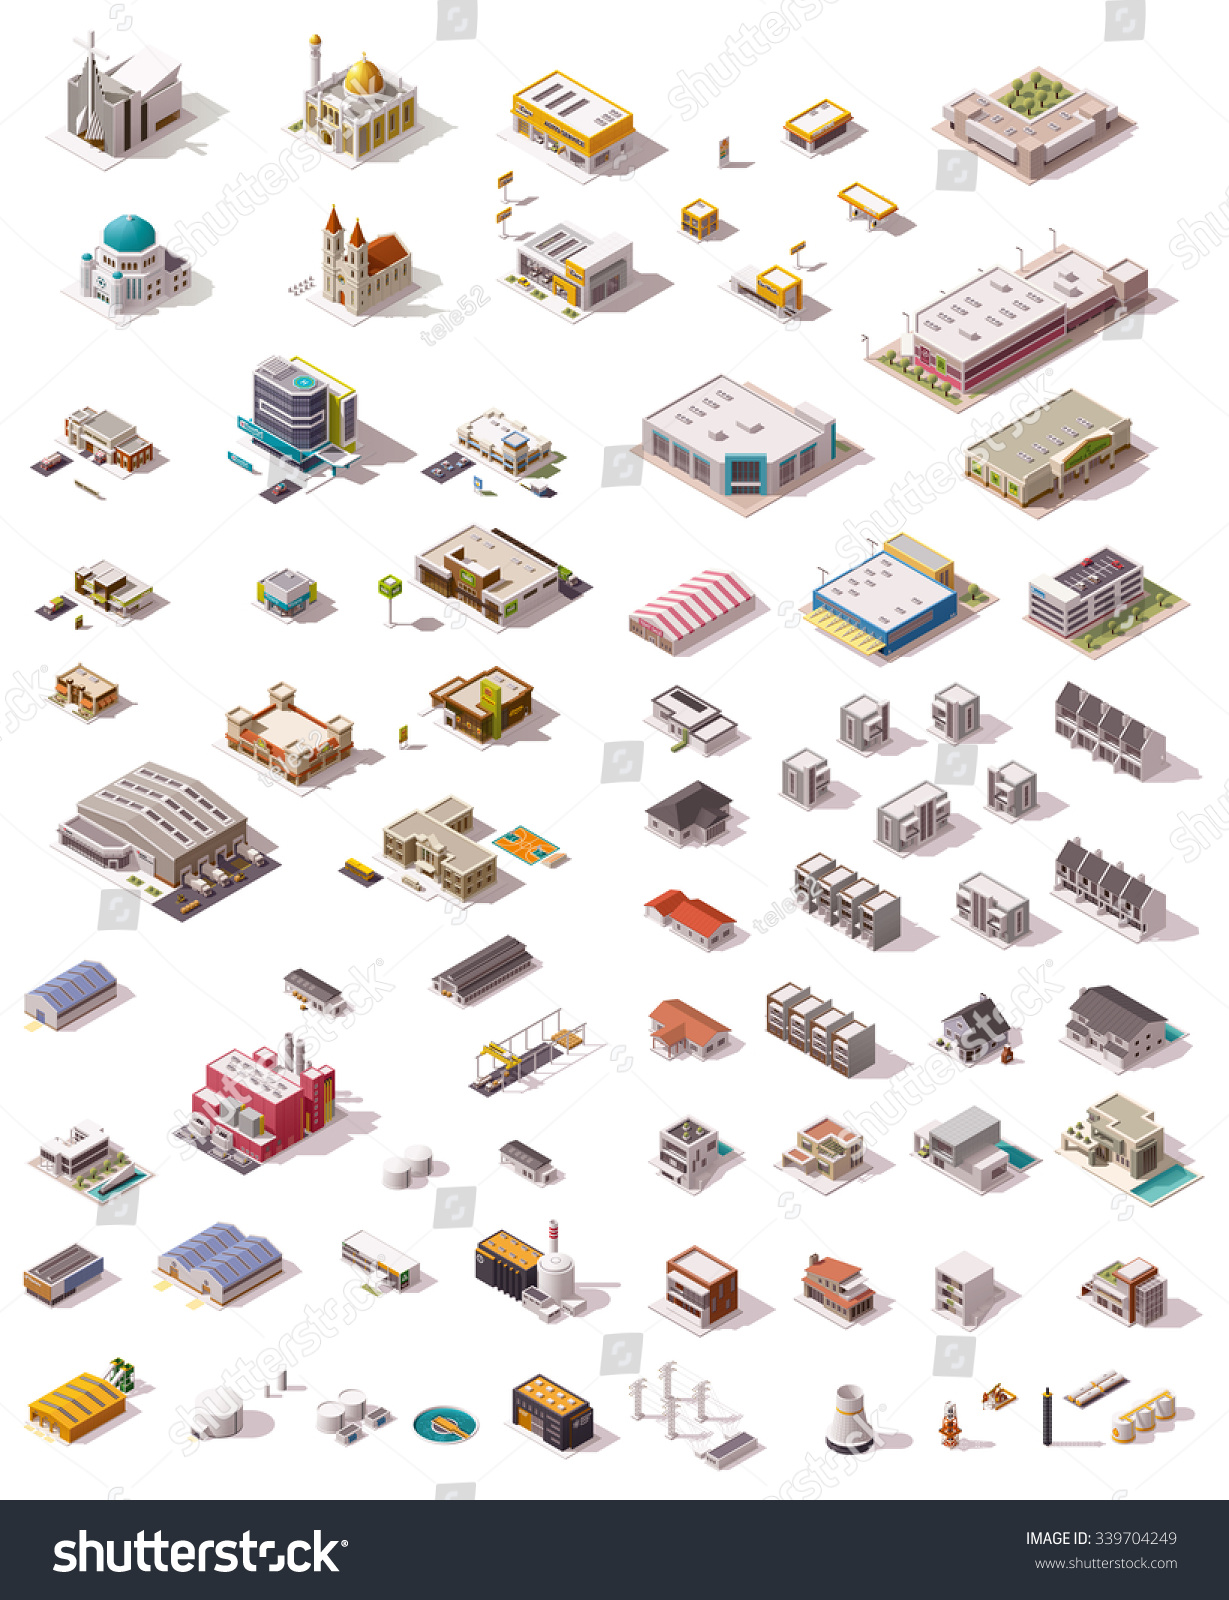 Isometric vector icon set which includes buildings, offices, homes, shops, stores, supermarkets, hospital, factory, warehouse, power plant, oil refinery and other industrial structures #339704249